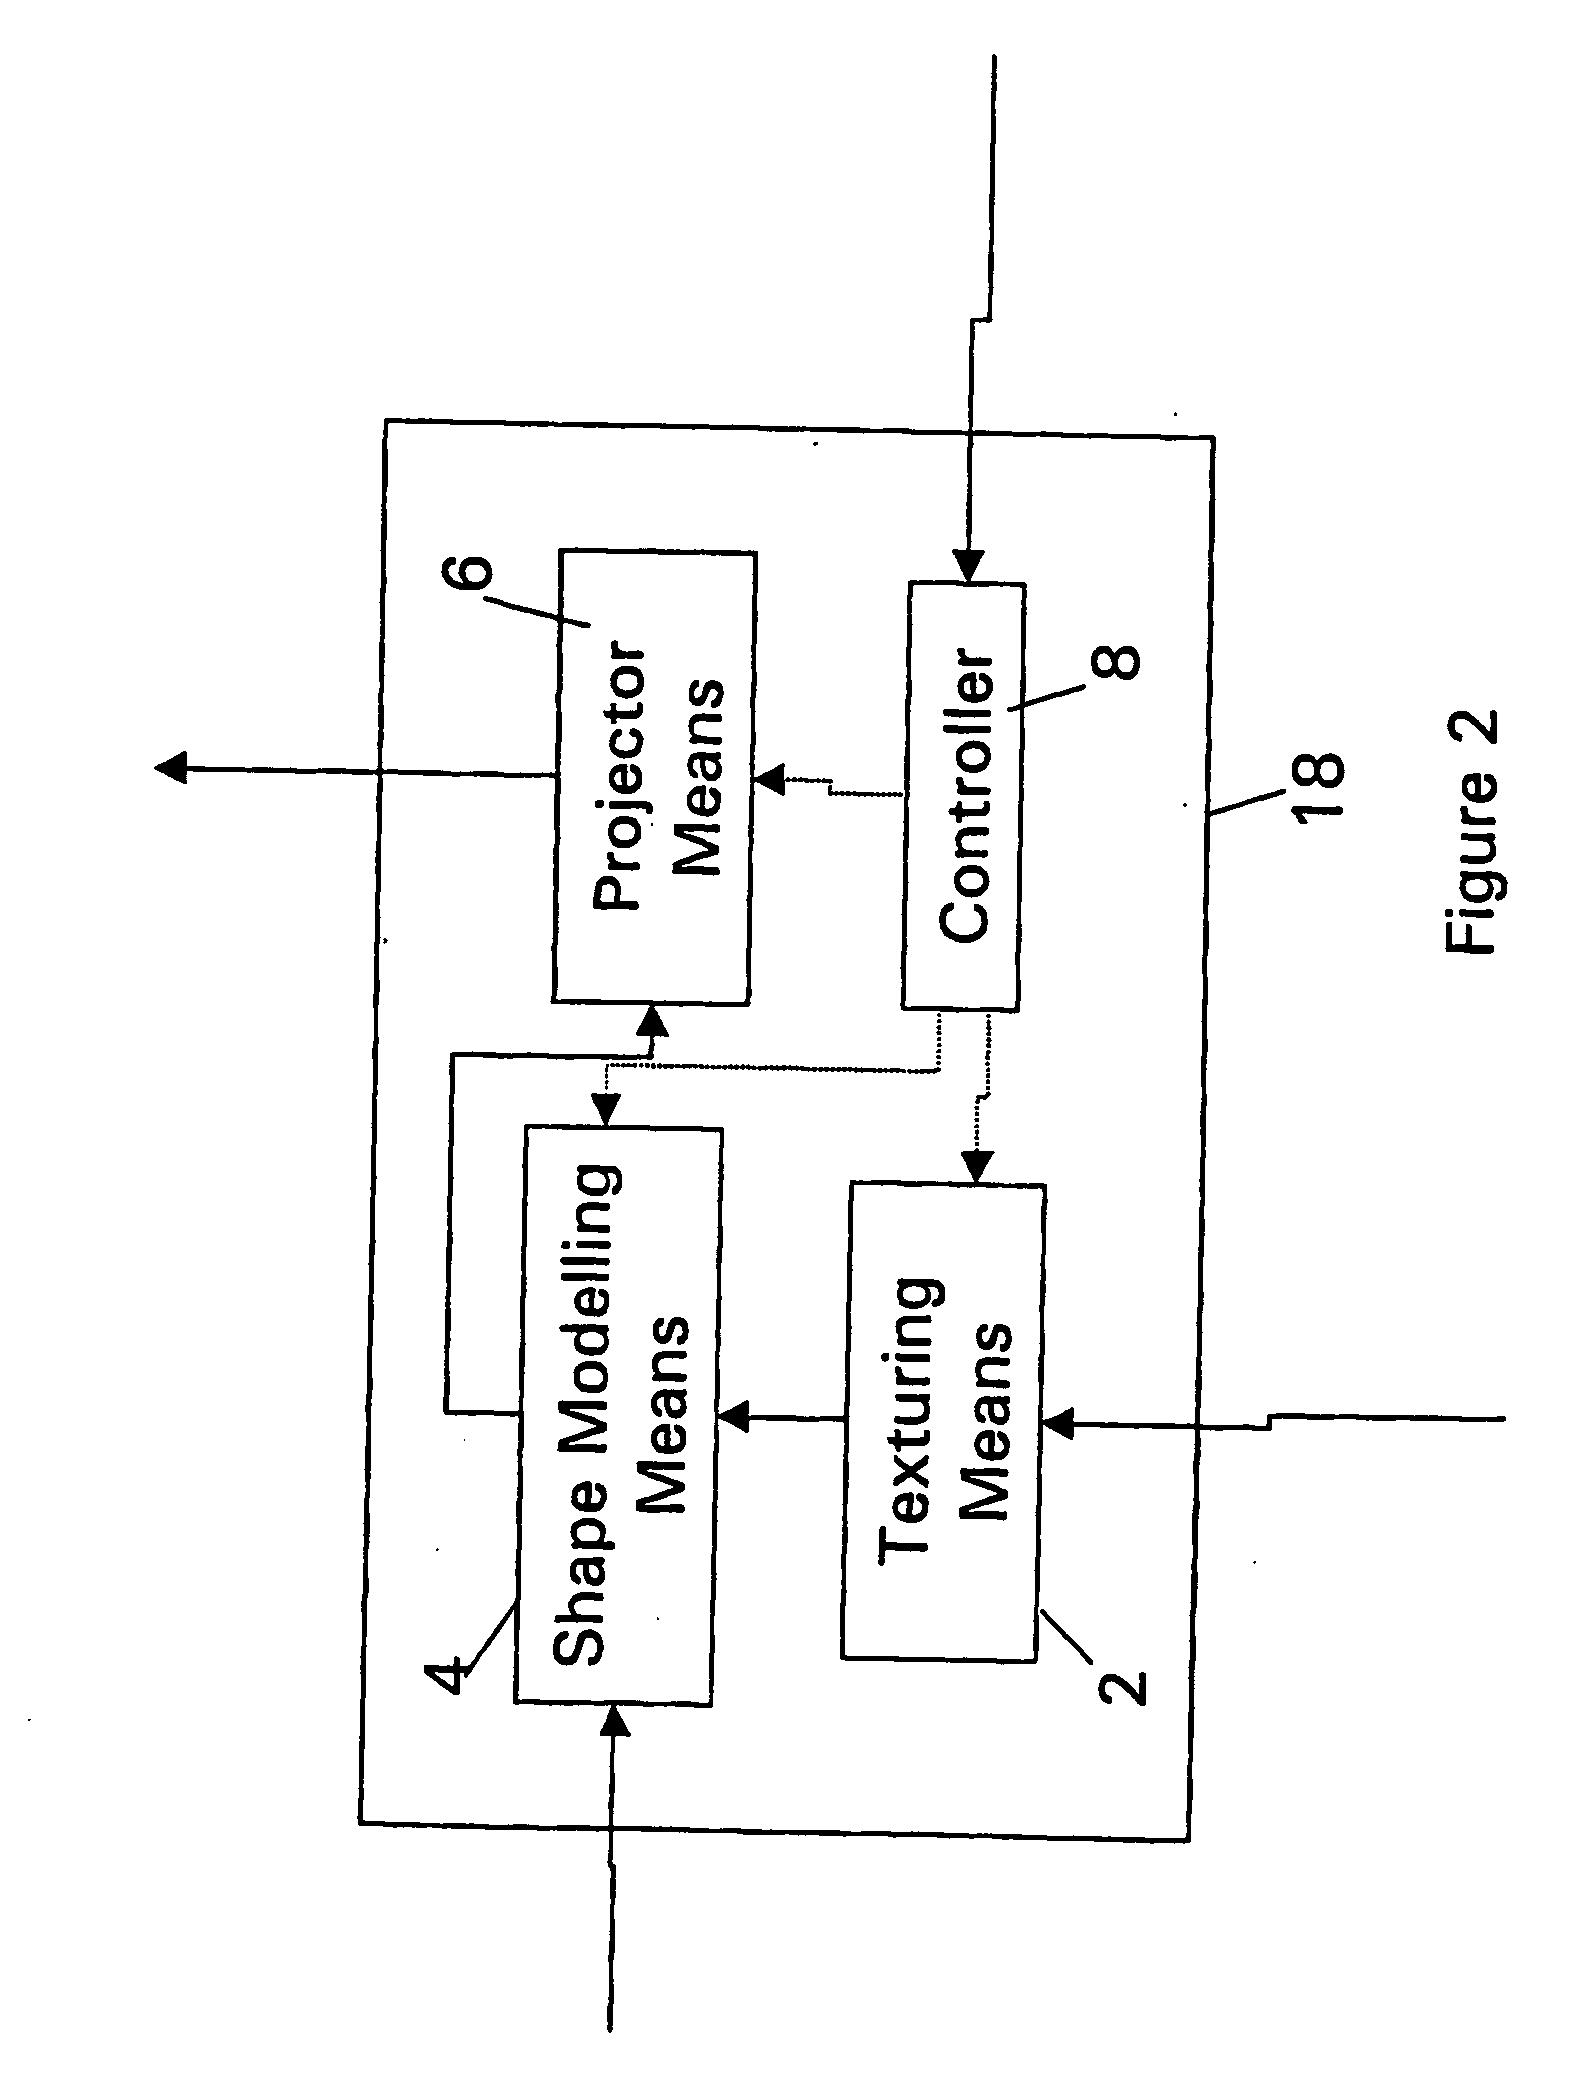 Image processing method and system